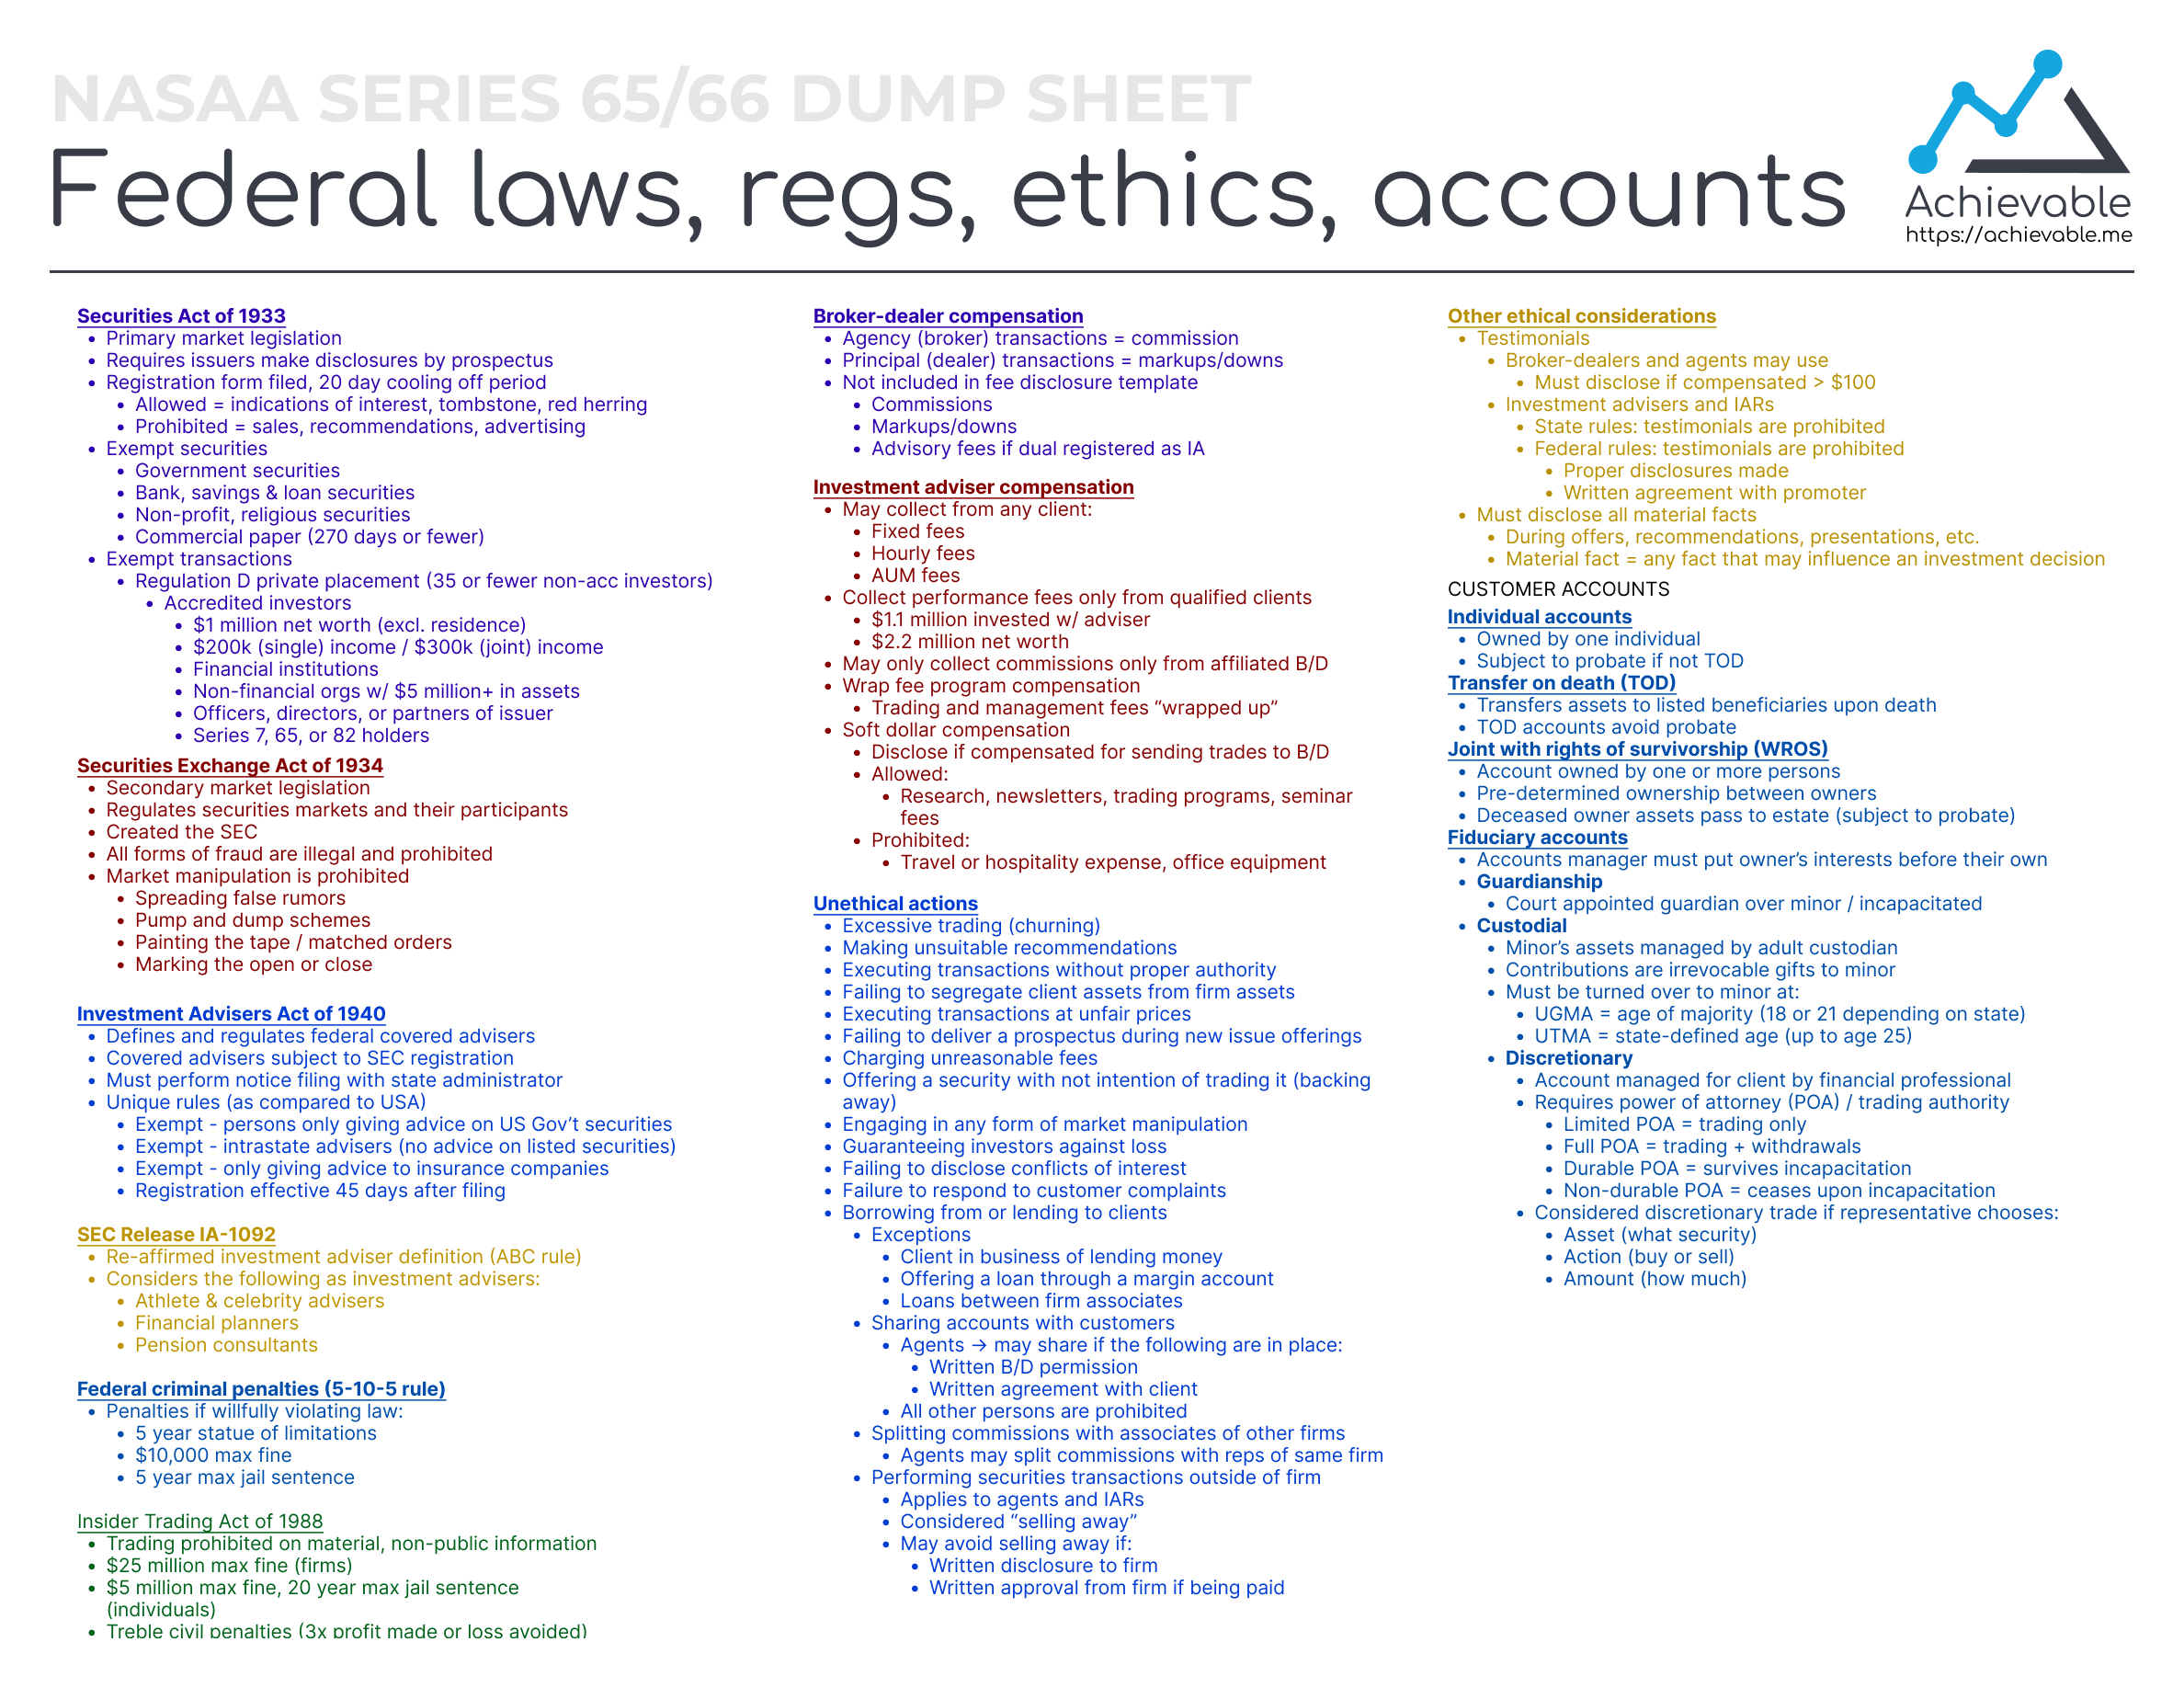 Series 66 Dump Sheet - Federal Laws, Regs, Ethics, and Accounts